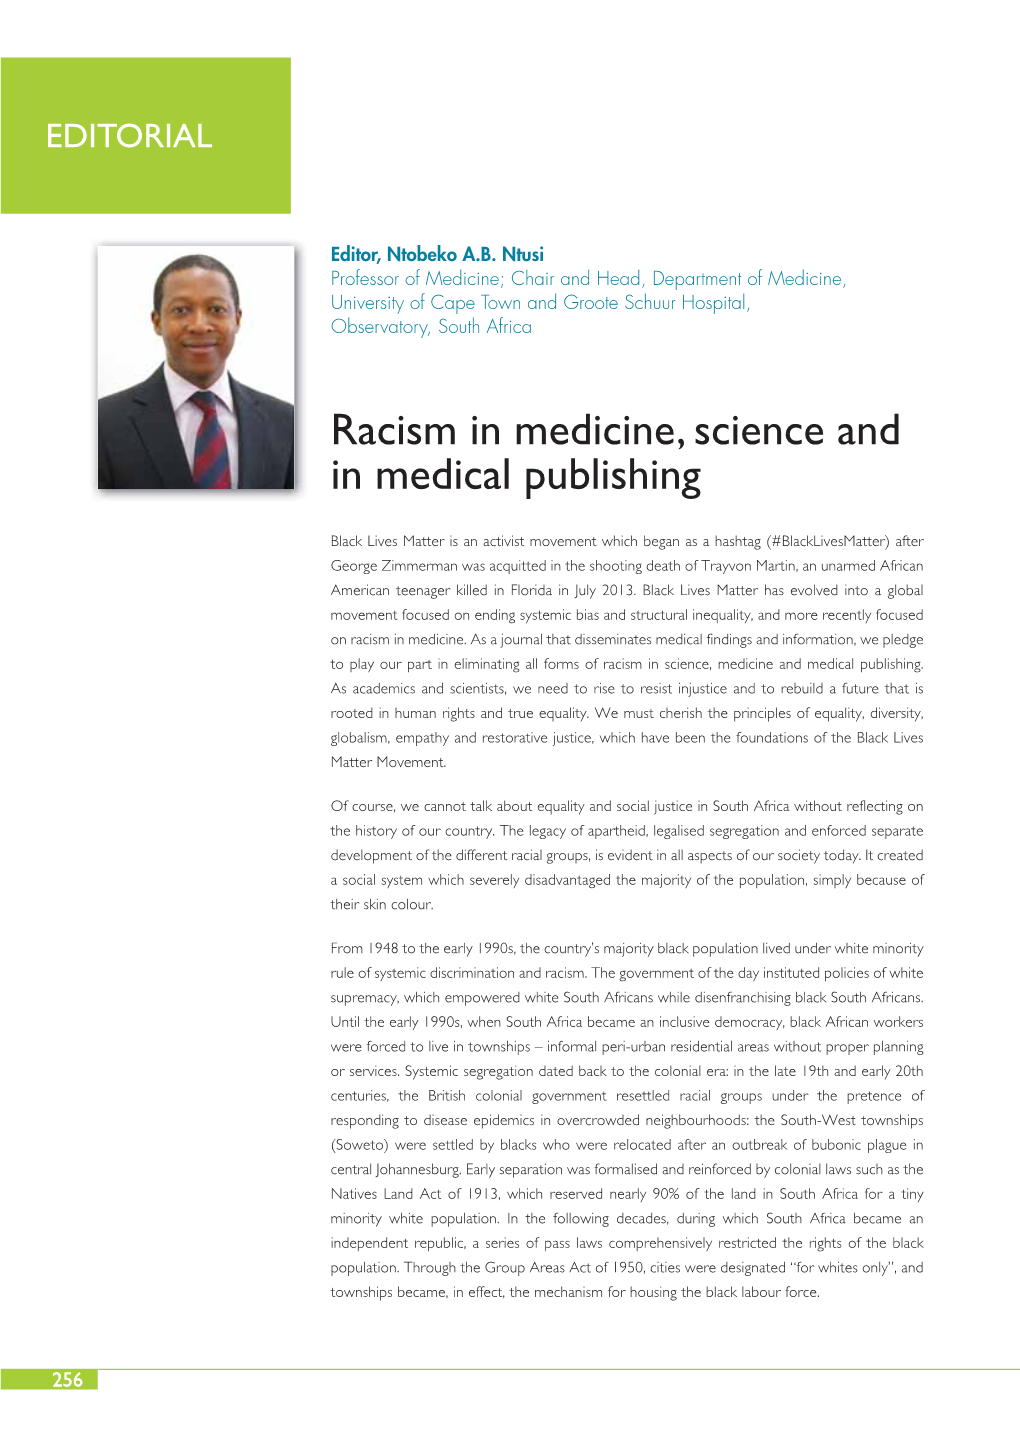 Racism in Medicine, Science and in Medical Publishing